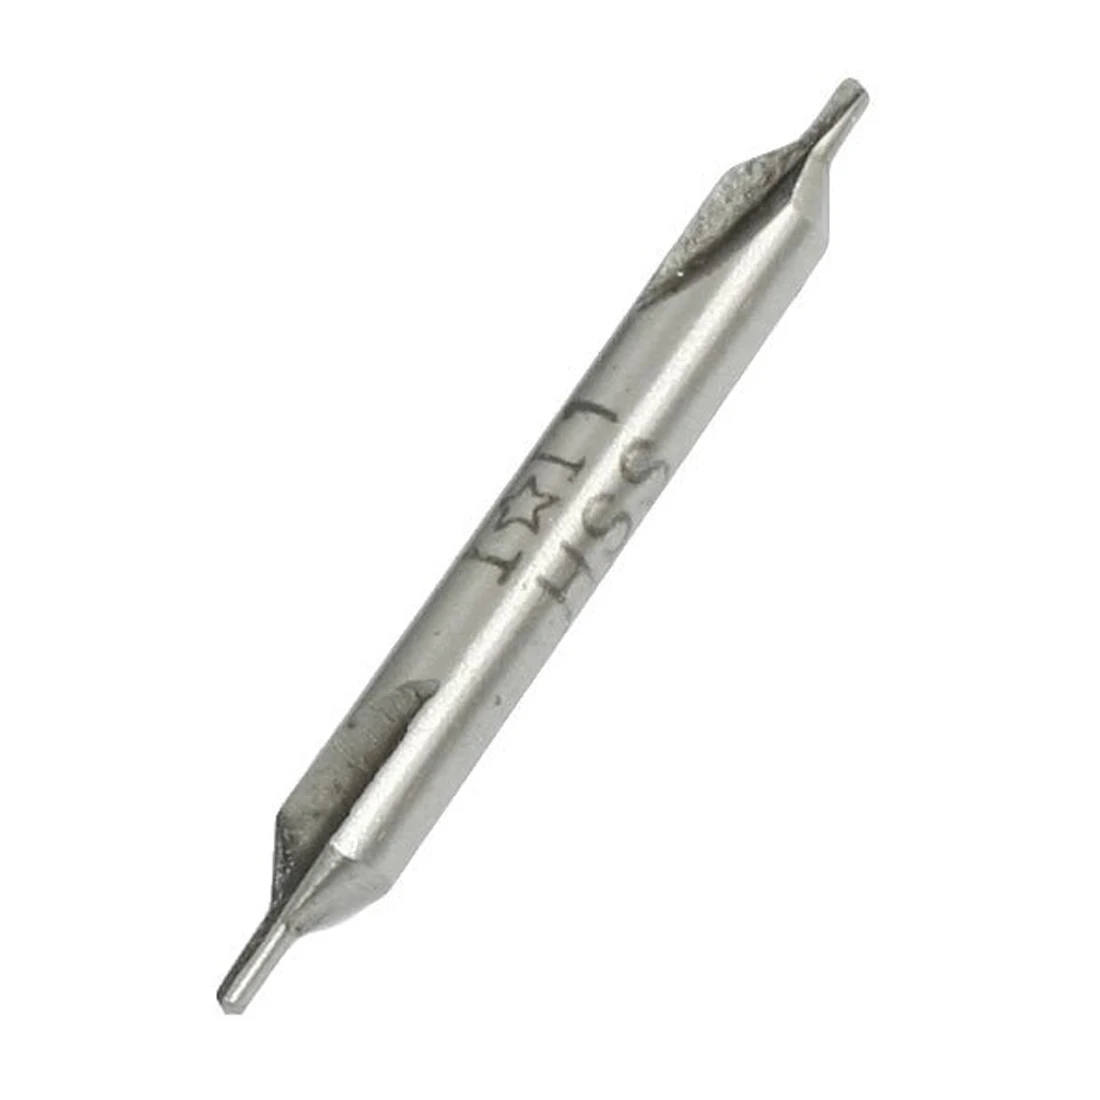 10 x High Speed Steel Double Ended Countersink Center Drill Bit 1mm